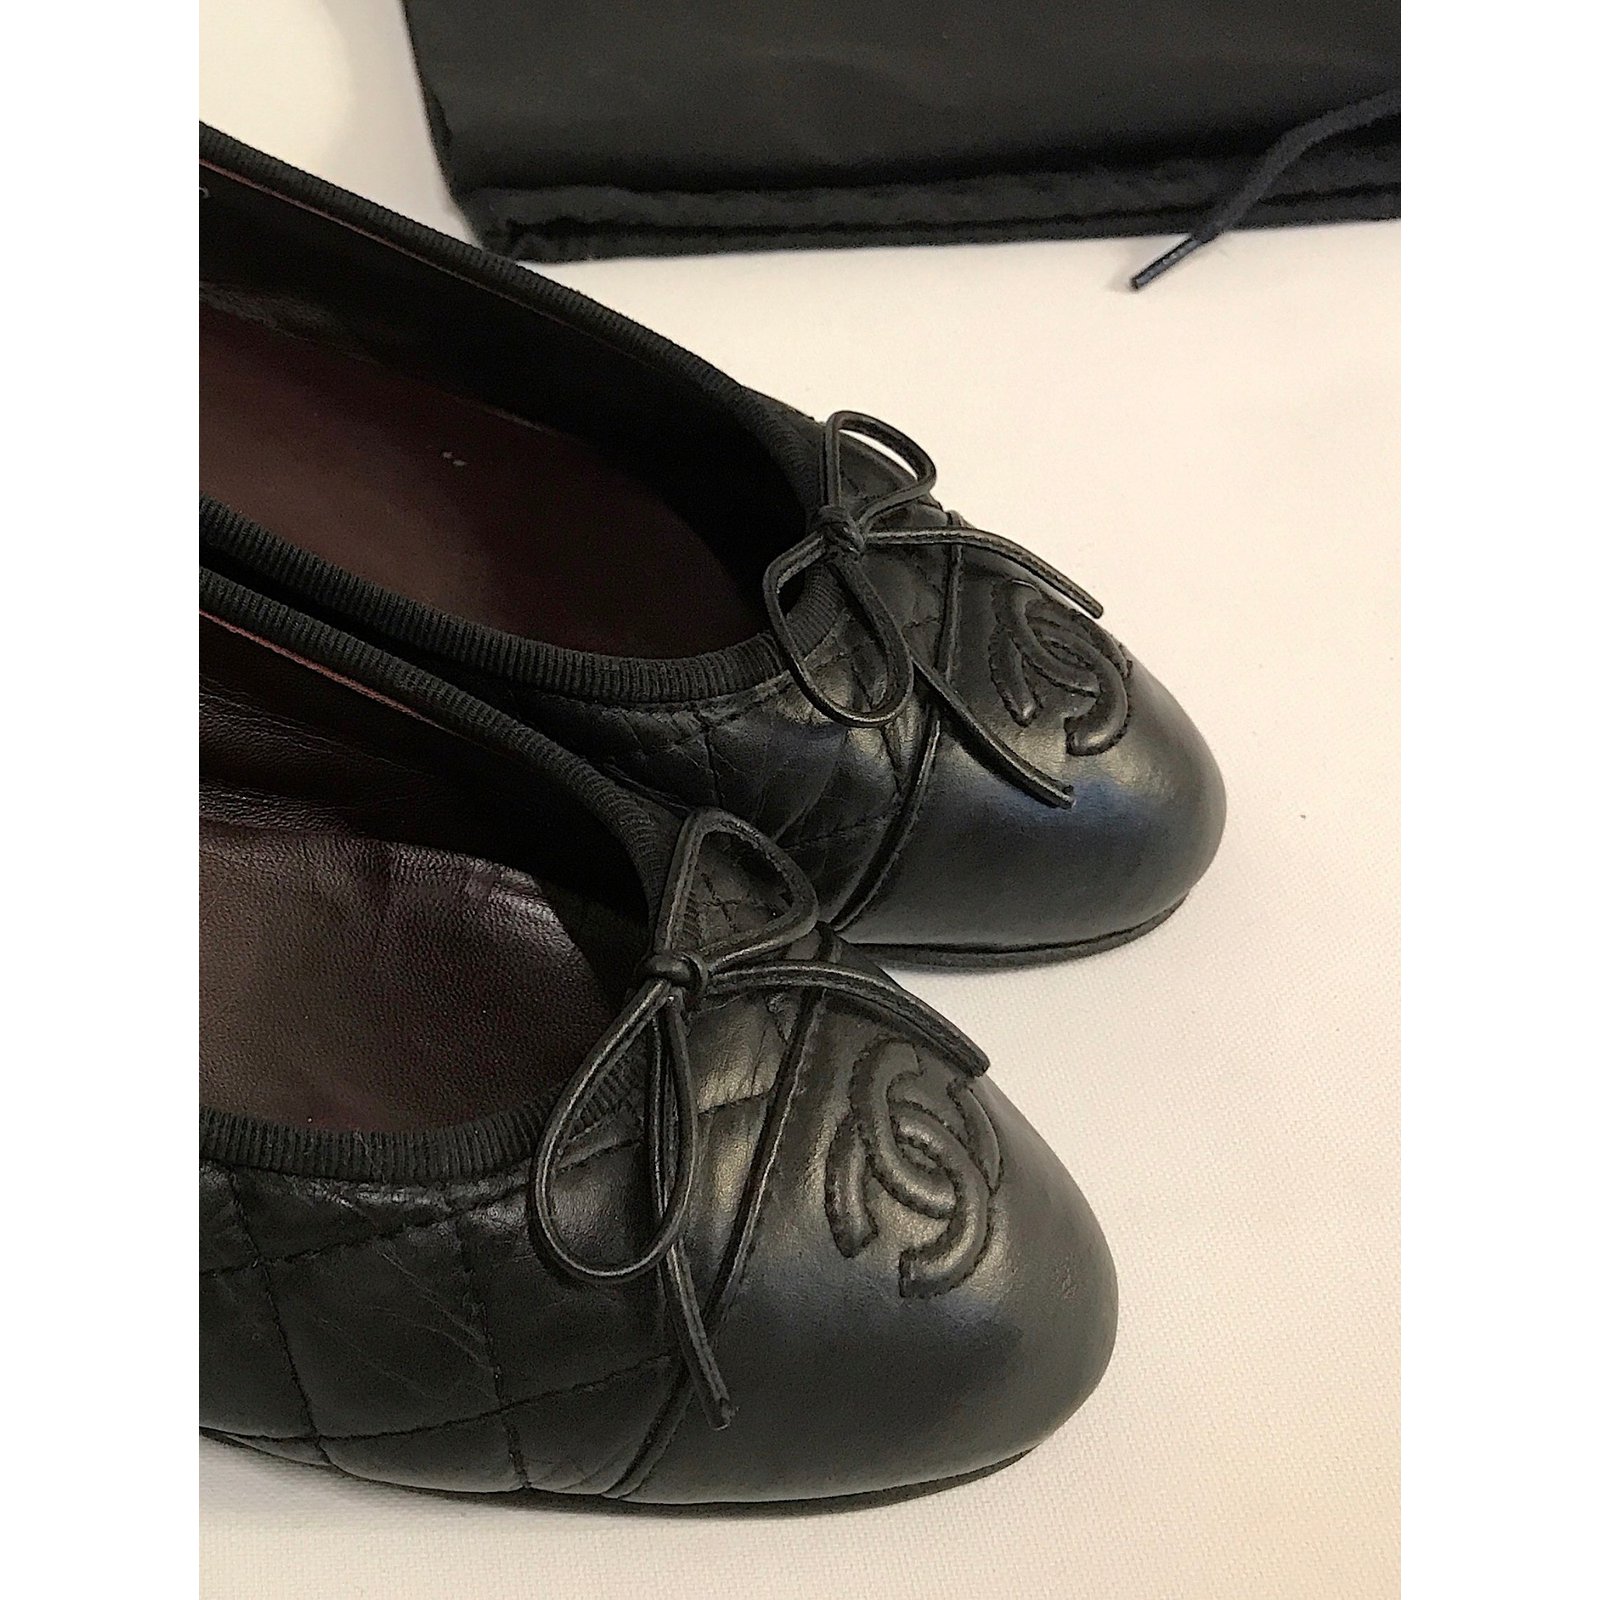 CHANEL, Shoes, Chanel Ballet Flats Size 385